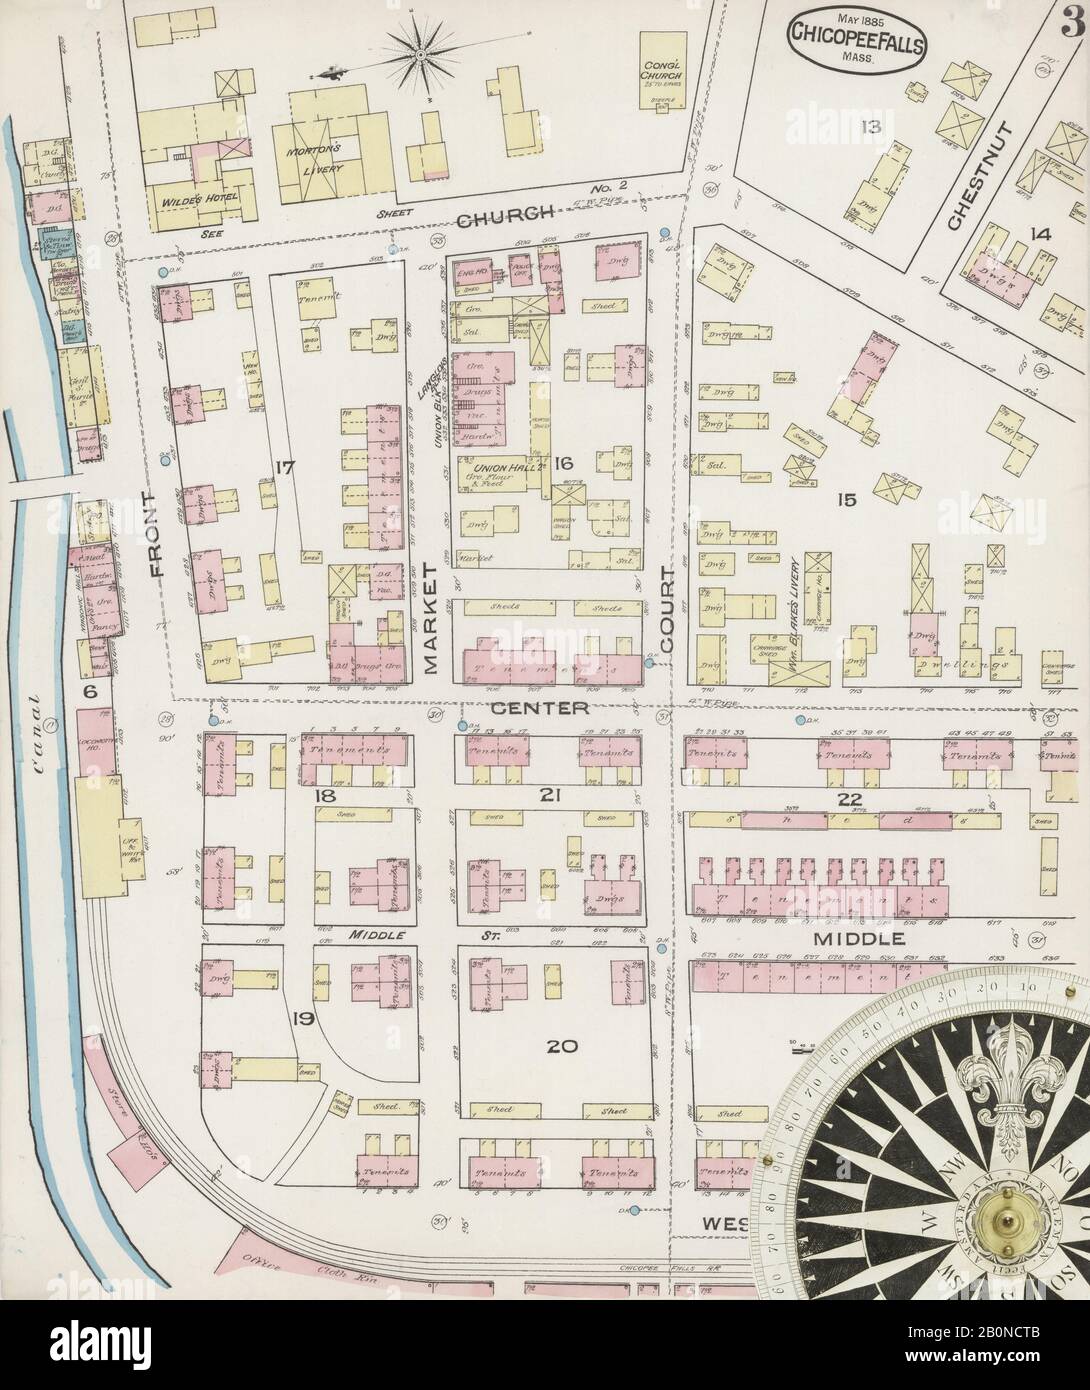 Image 3 of Sanborn Fire Insurance Map from Chicopee Falls, Hampden County, Massachusetts. May 1885. 3 Sheet(s), America, street map with a Nineteenth Century compass Stock Photo